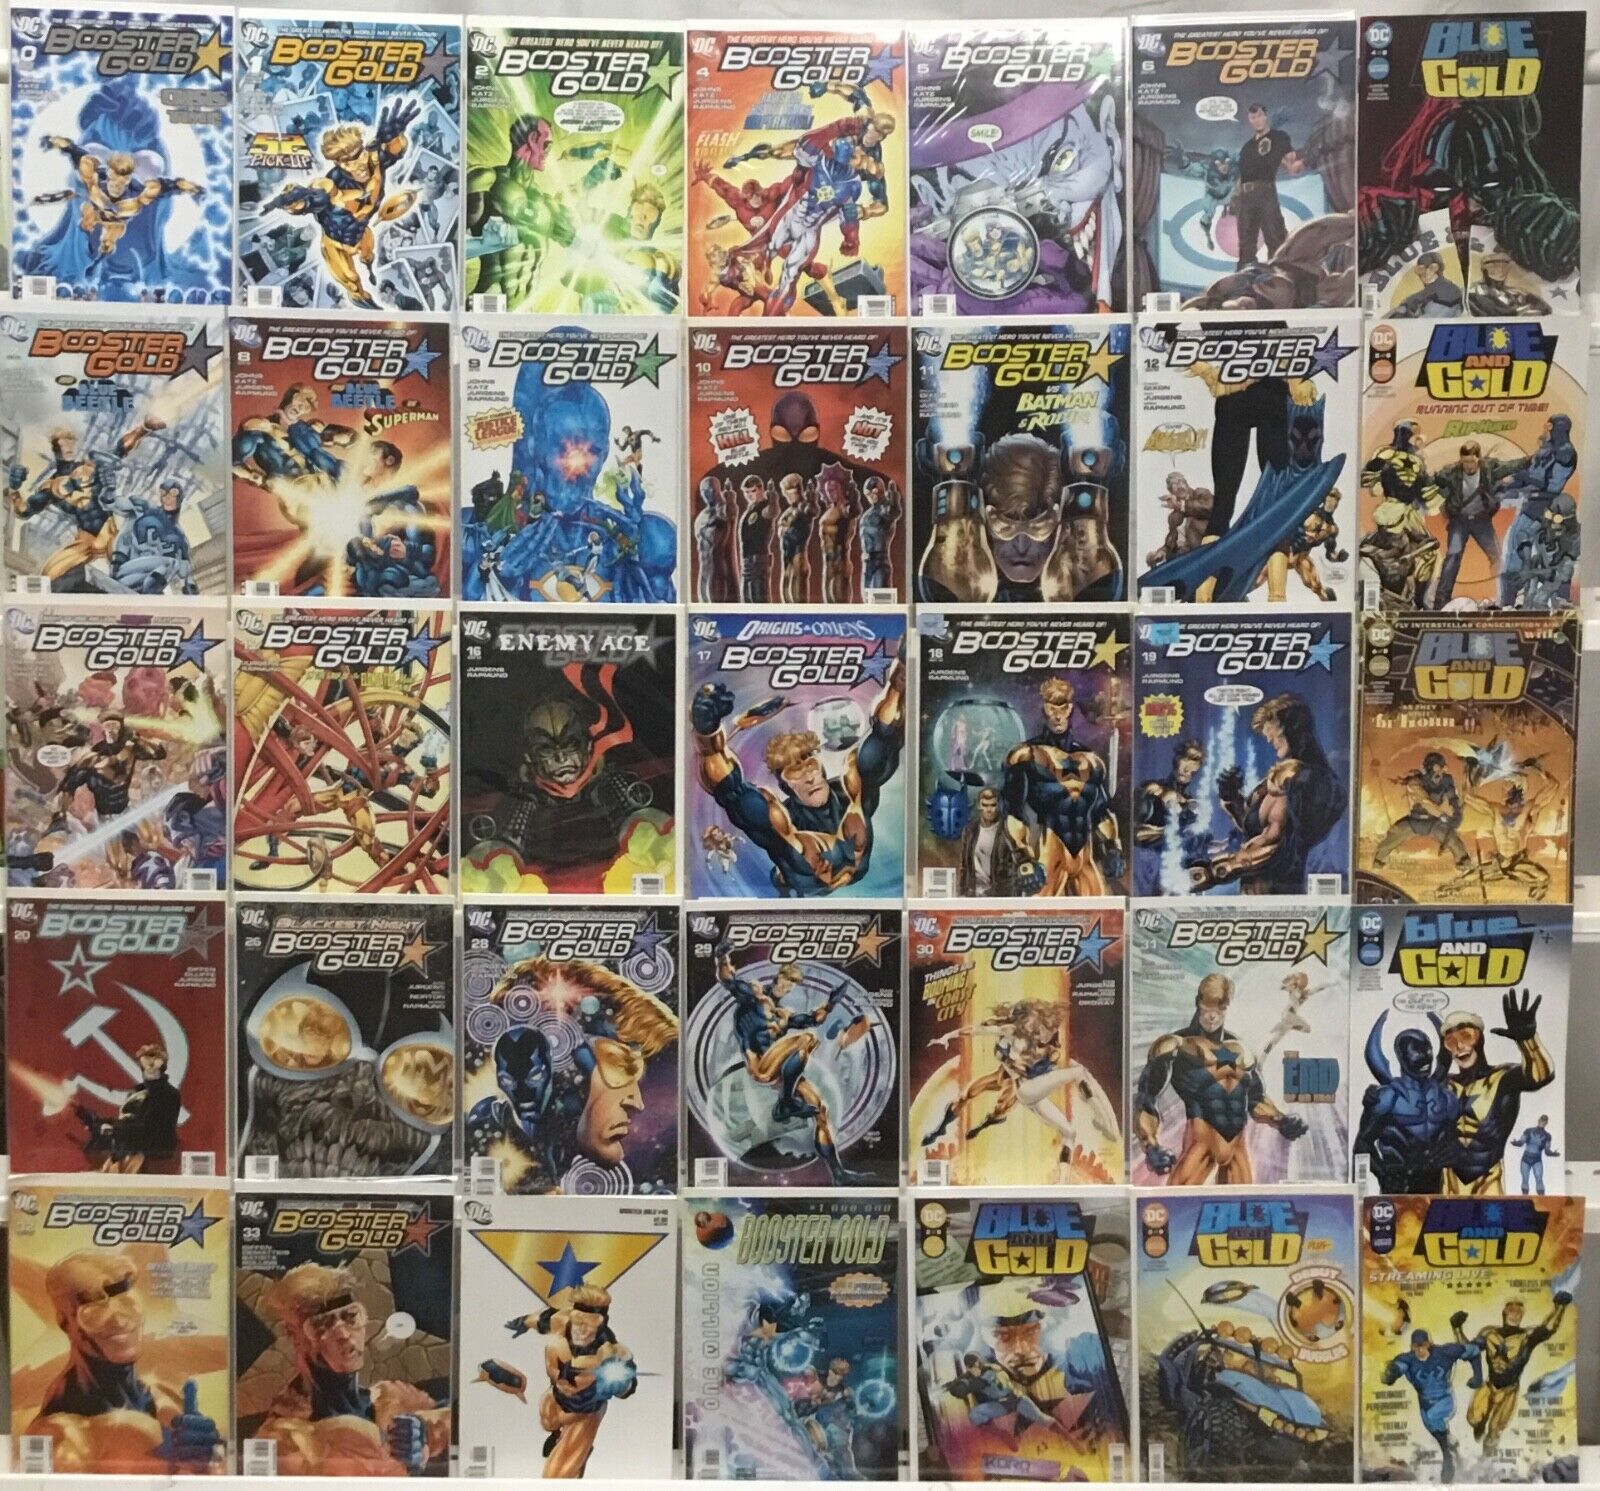 DC Comics - Booster Gold - Comic Book Lot of 35 Issues